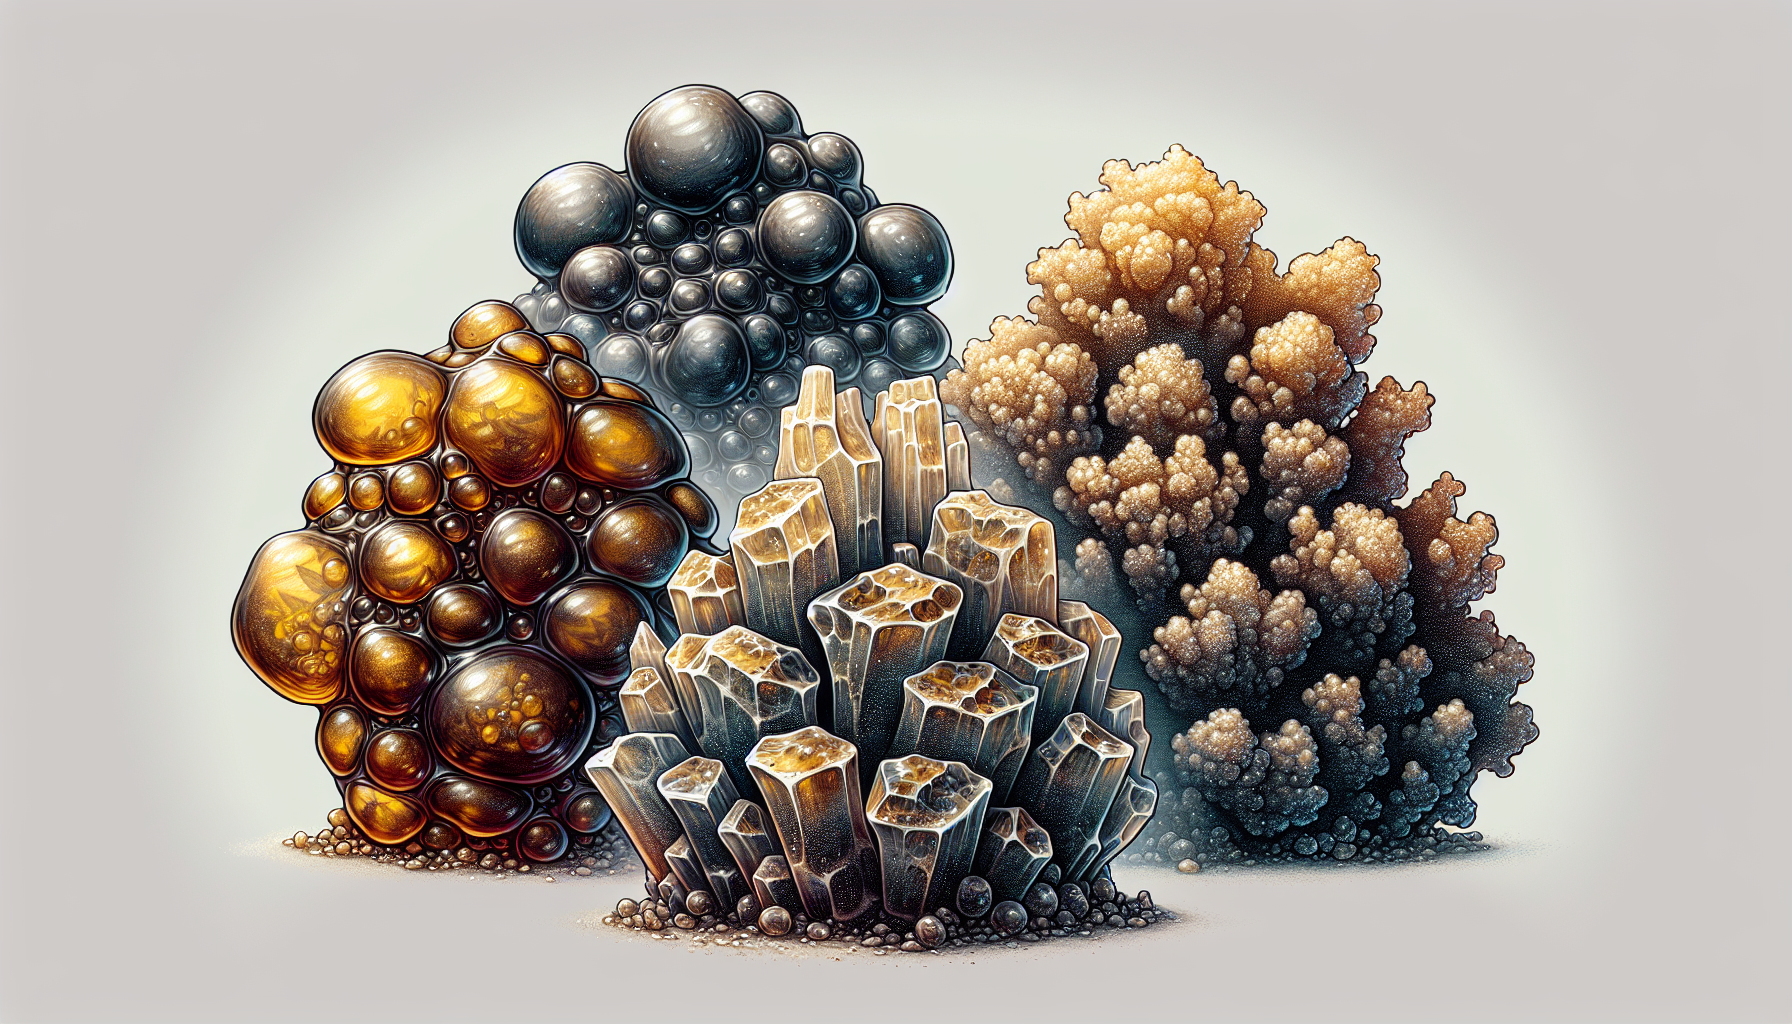 Artistic depiction of various forms of hash